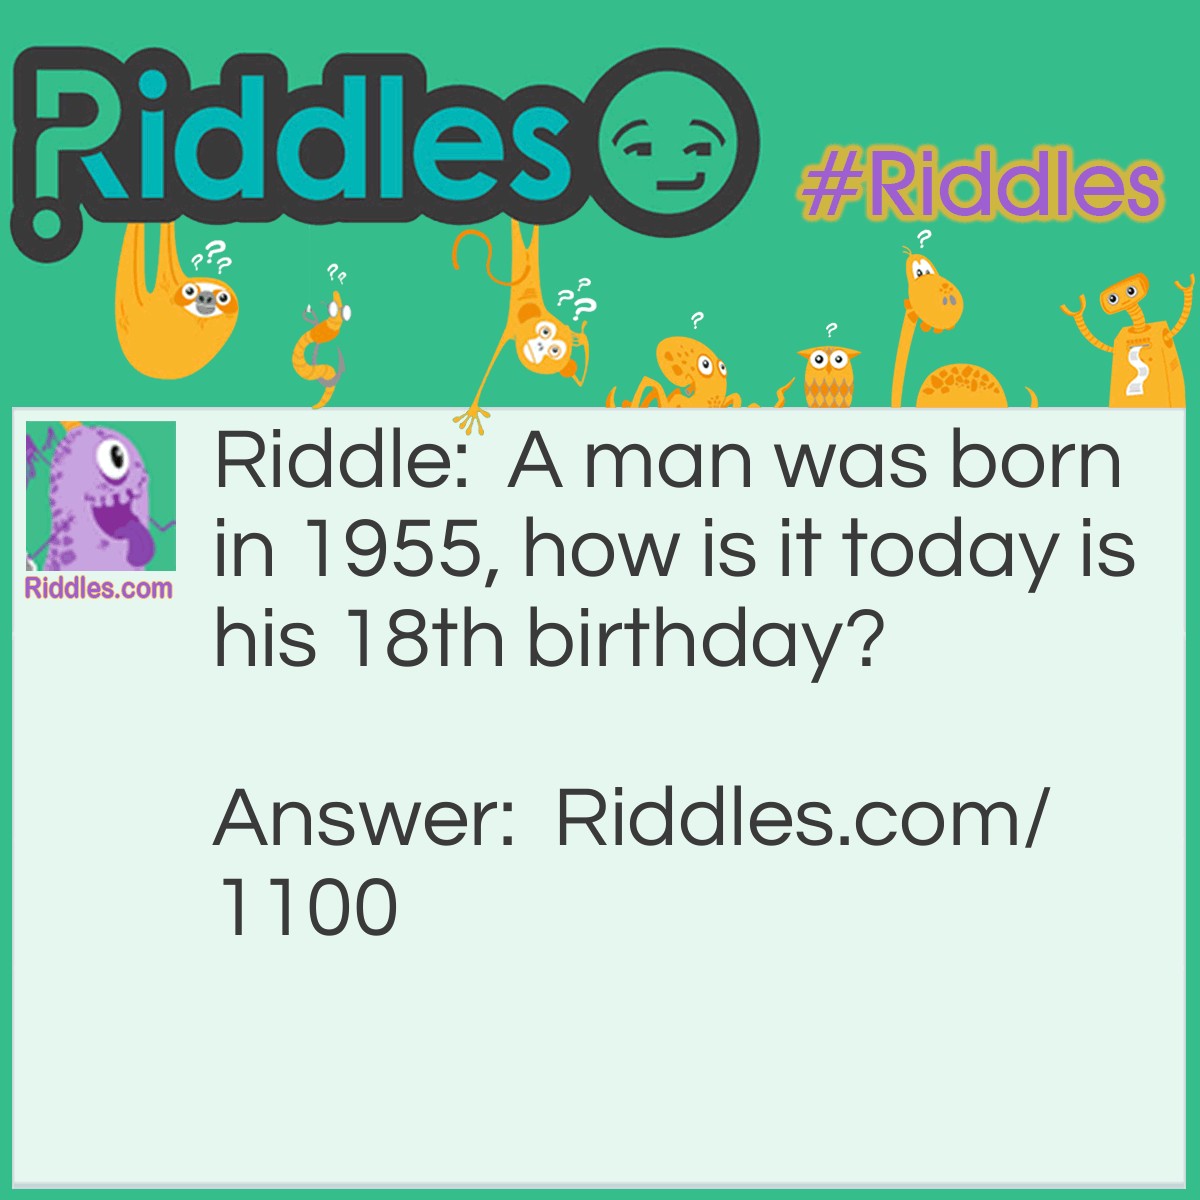 Riddle: A man was born in 1955, how is it today is his 18th birthday? Answer: He was born in room 1955 of the hospital.